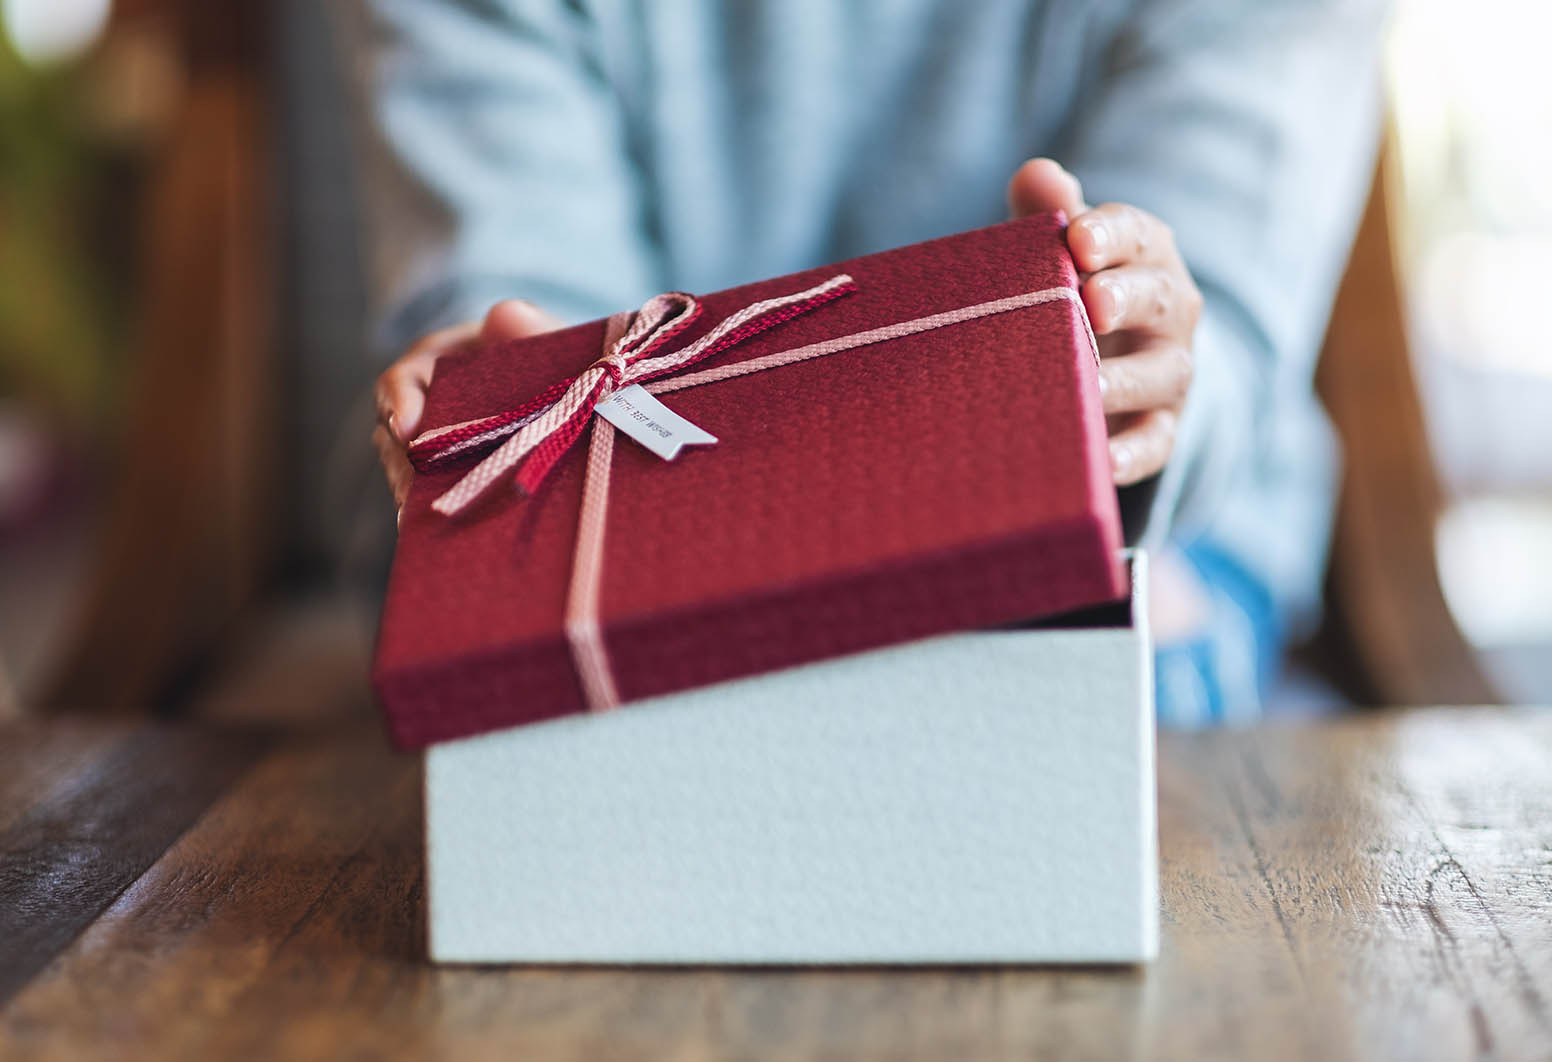 Importance of gifting during tough times